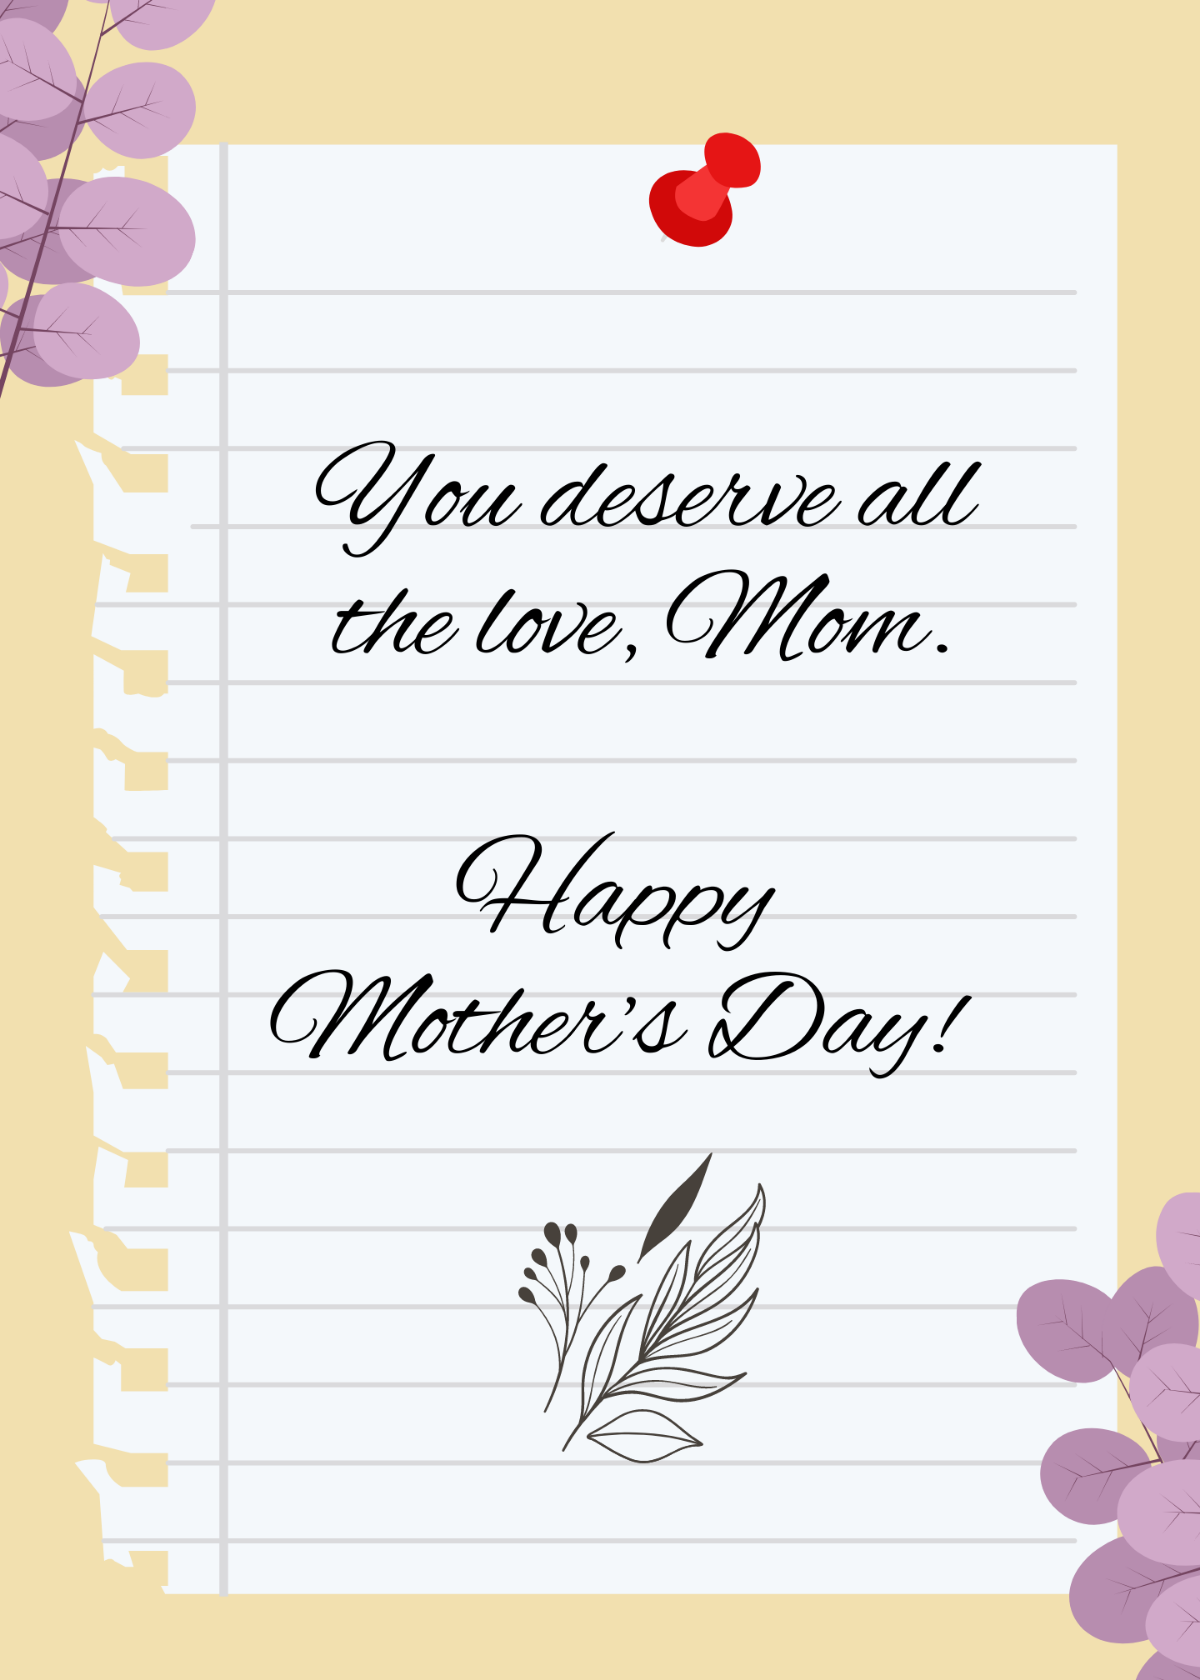 Mother's Day Message Template